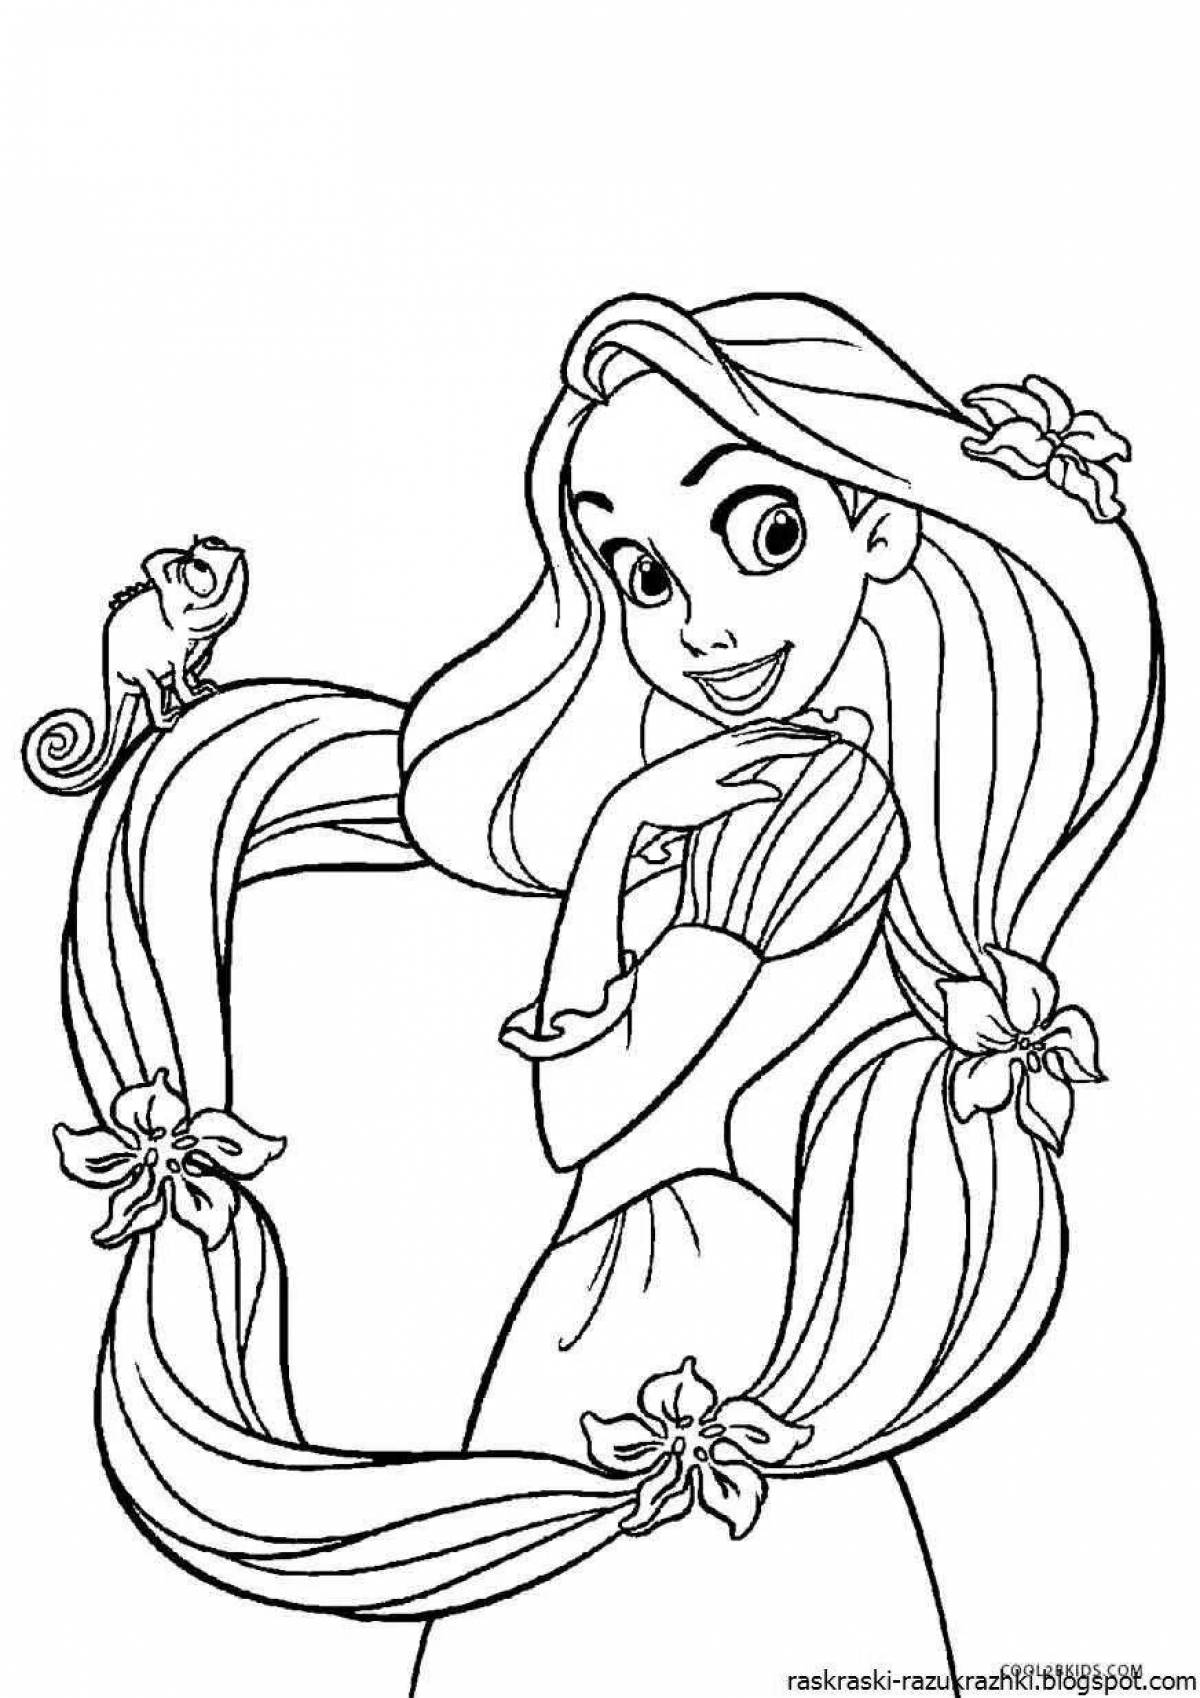 Exotic rapunzel coloring book for kids